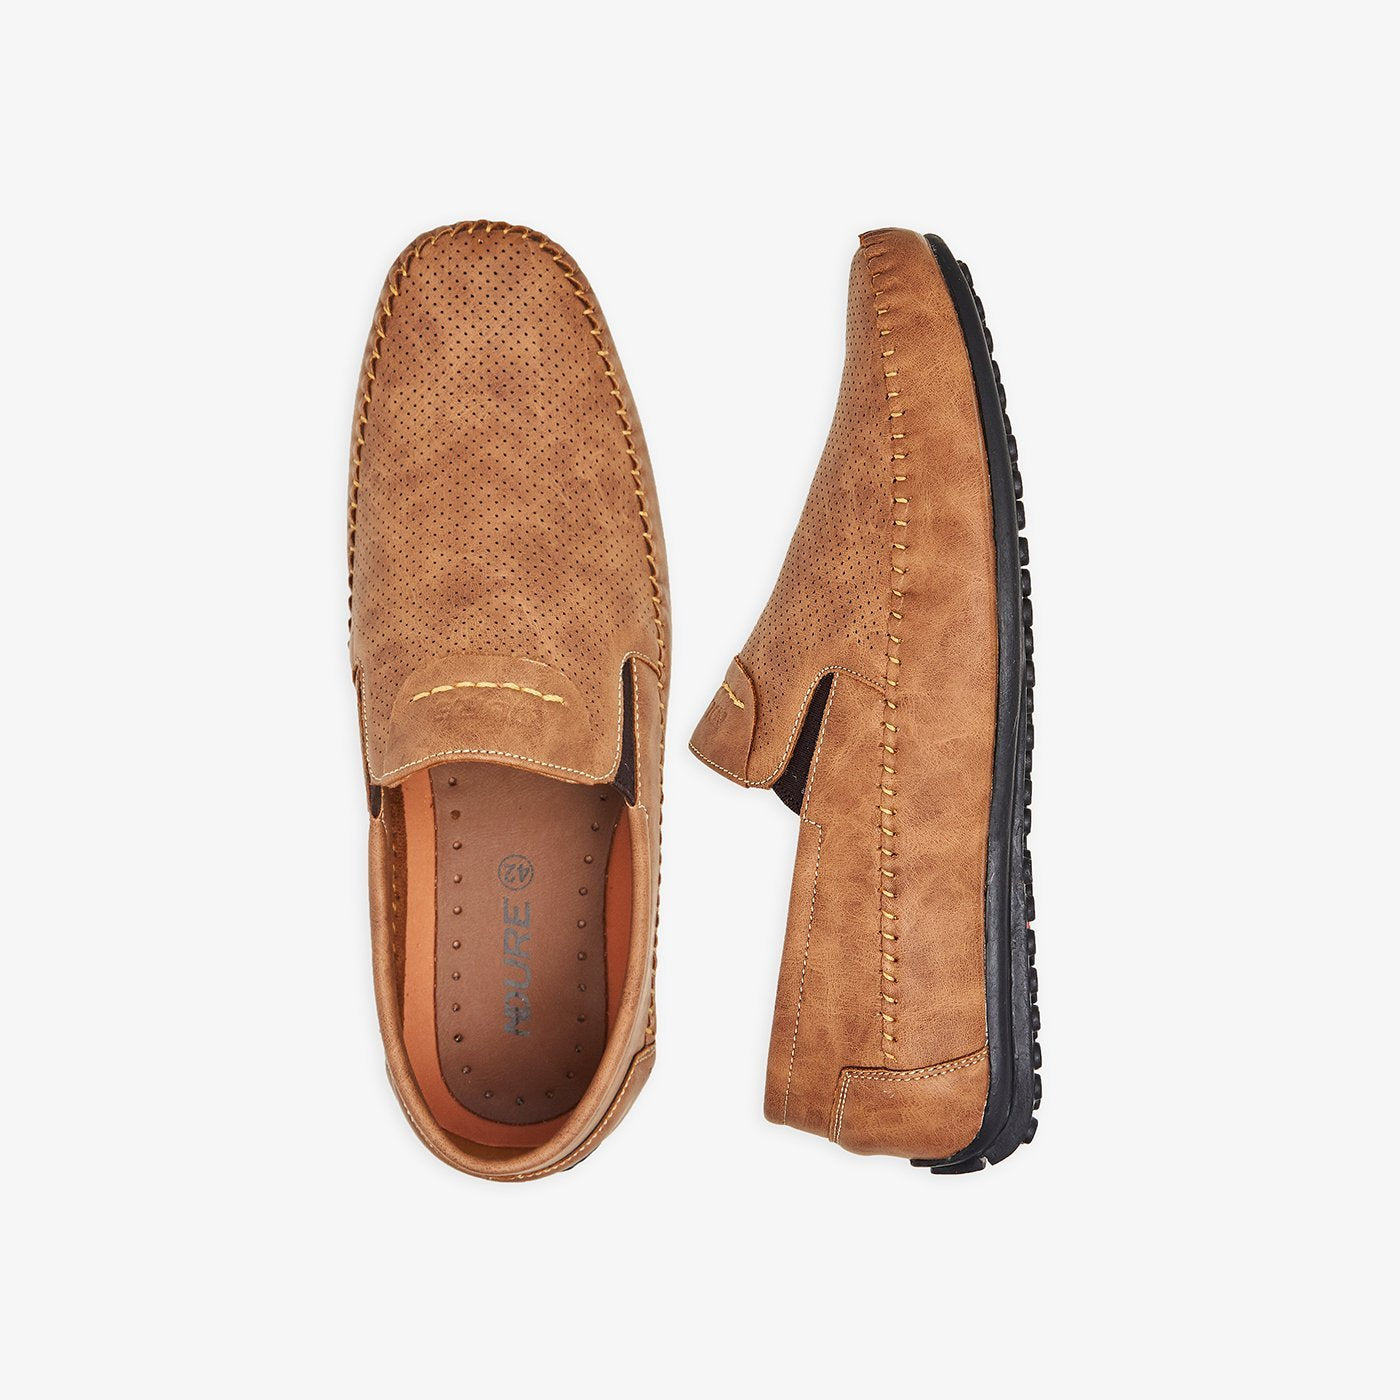 Classic Men's Loafers